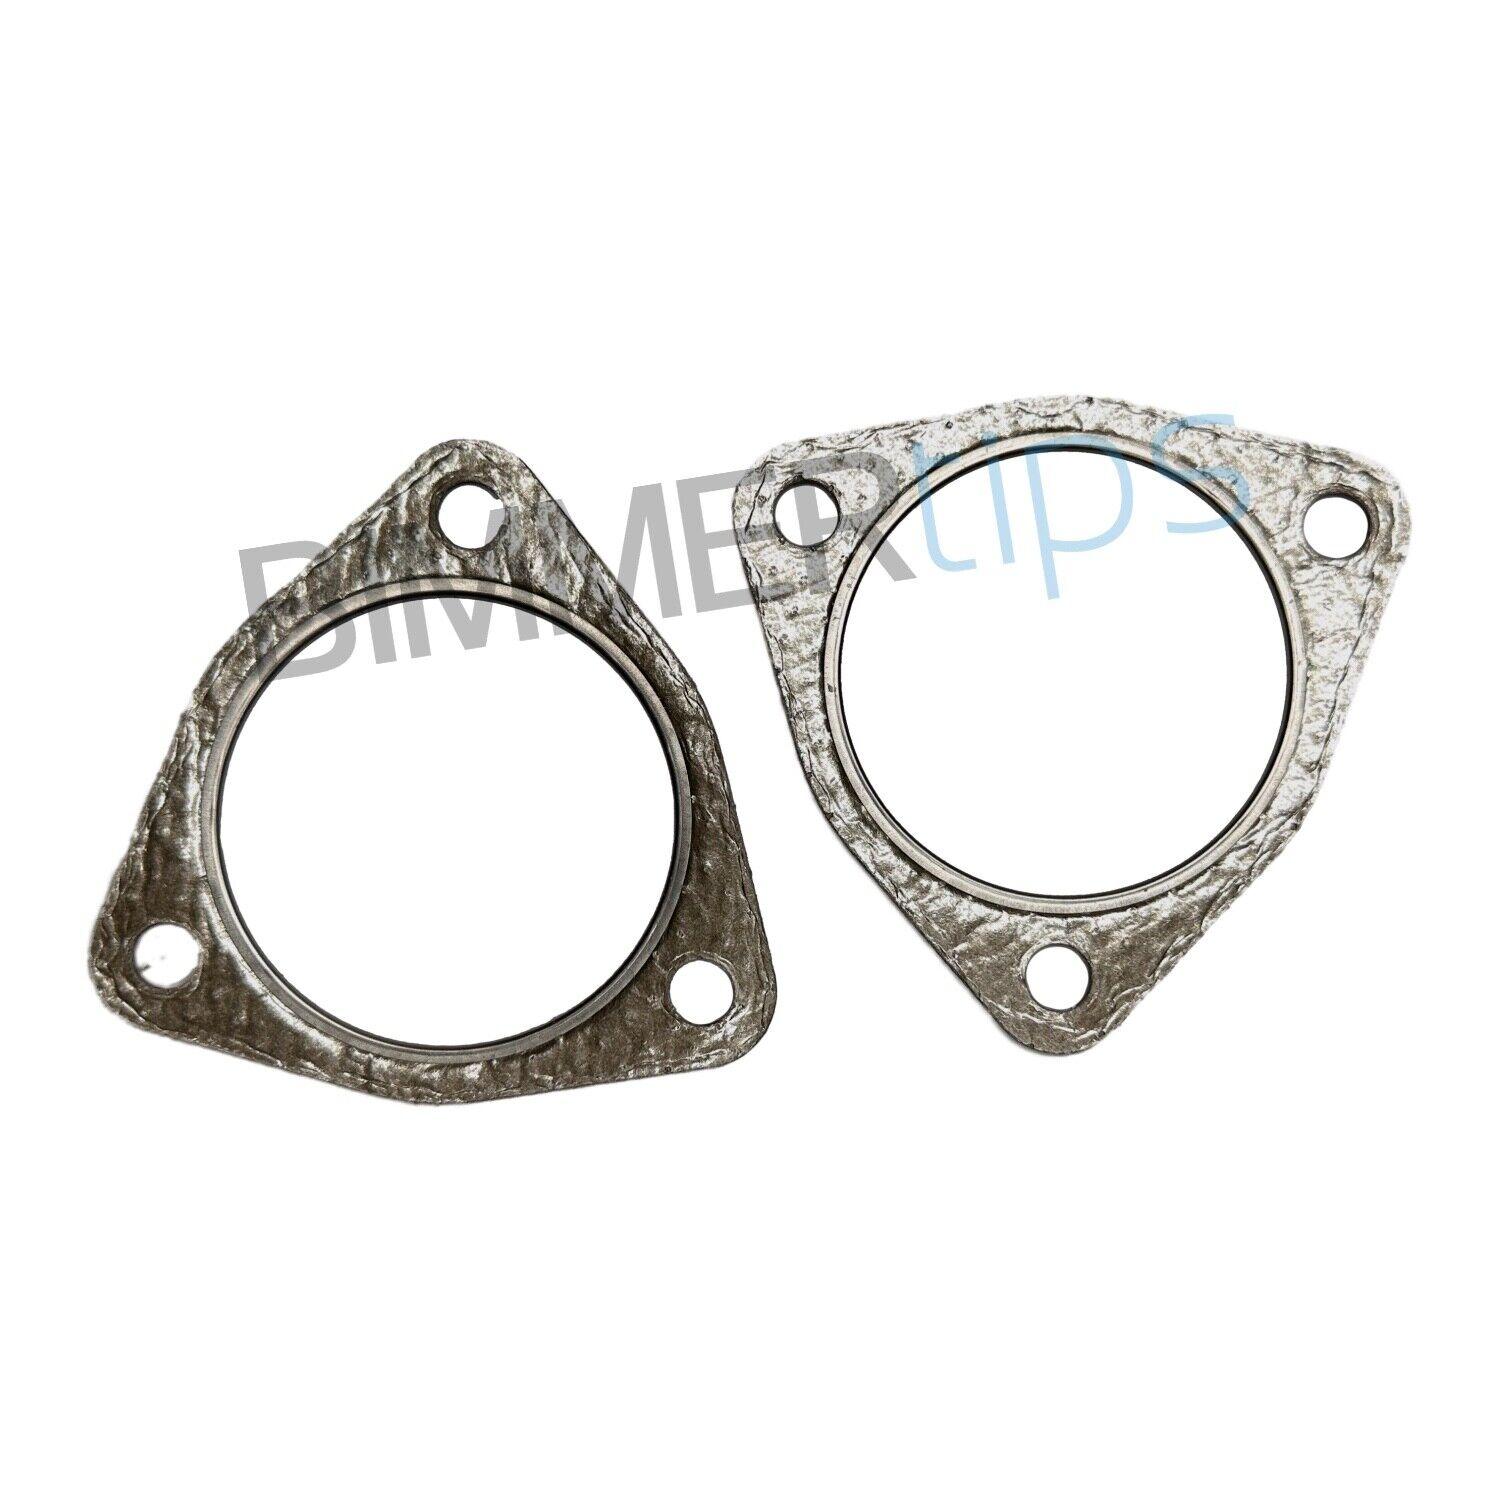 E85 Z4 M Roadster Exhaust Manifold Gasket for BMW S54 18307830674 Germany